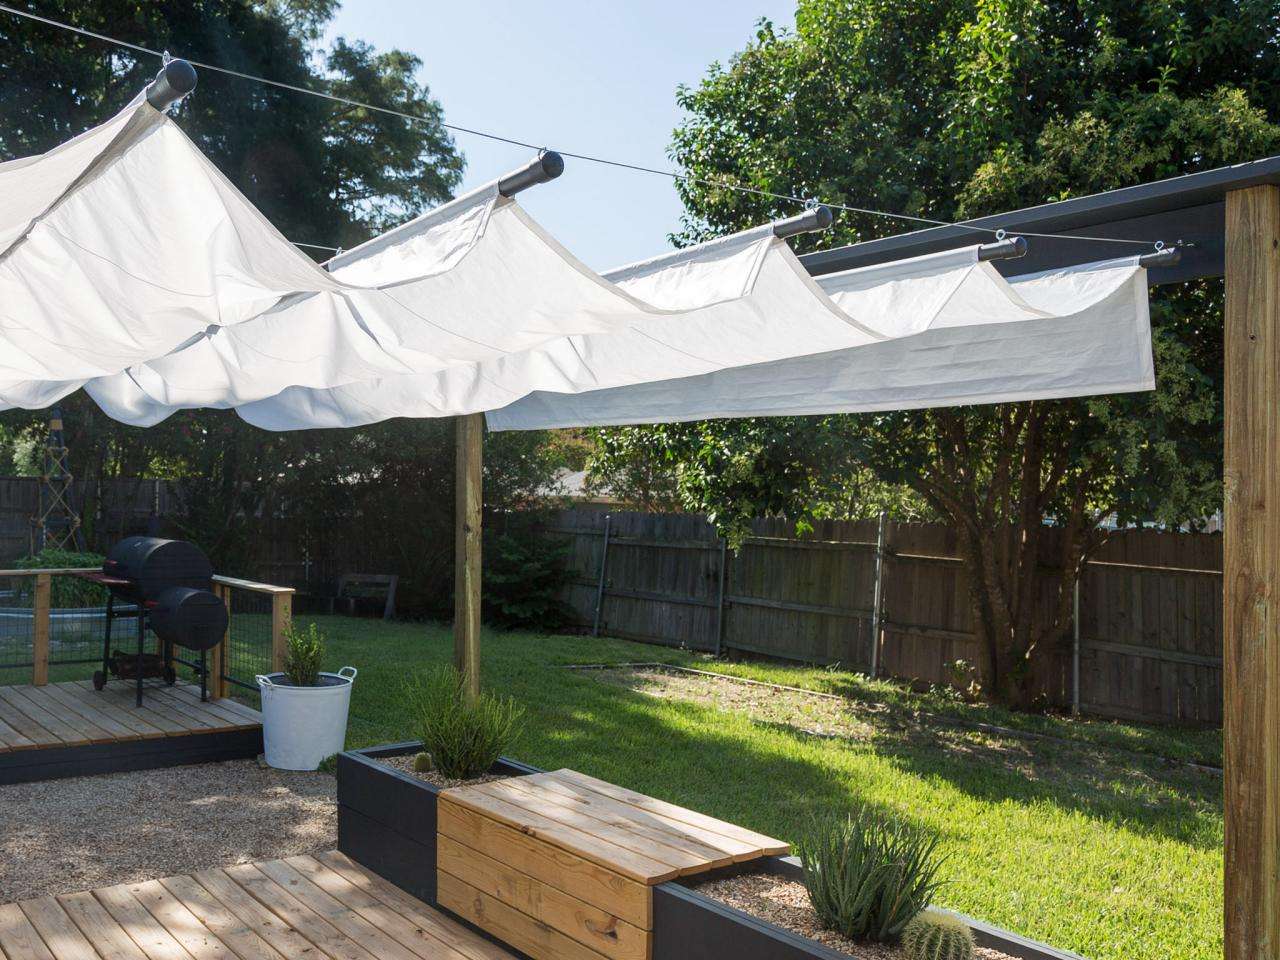 How To Make Your Own Retractable Awning